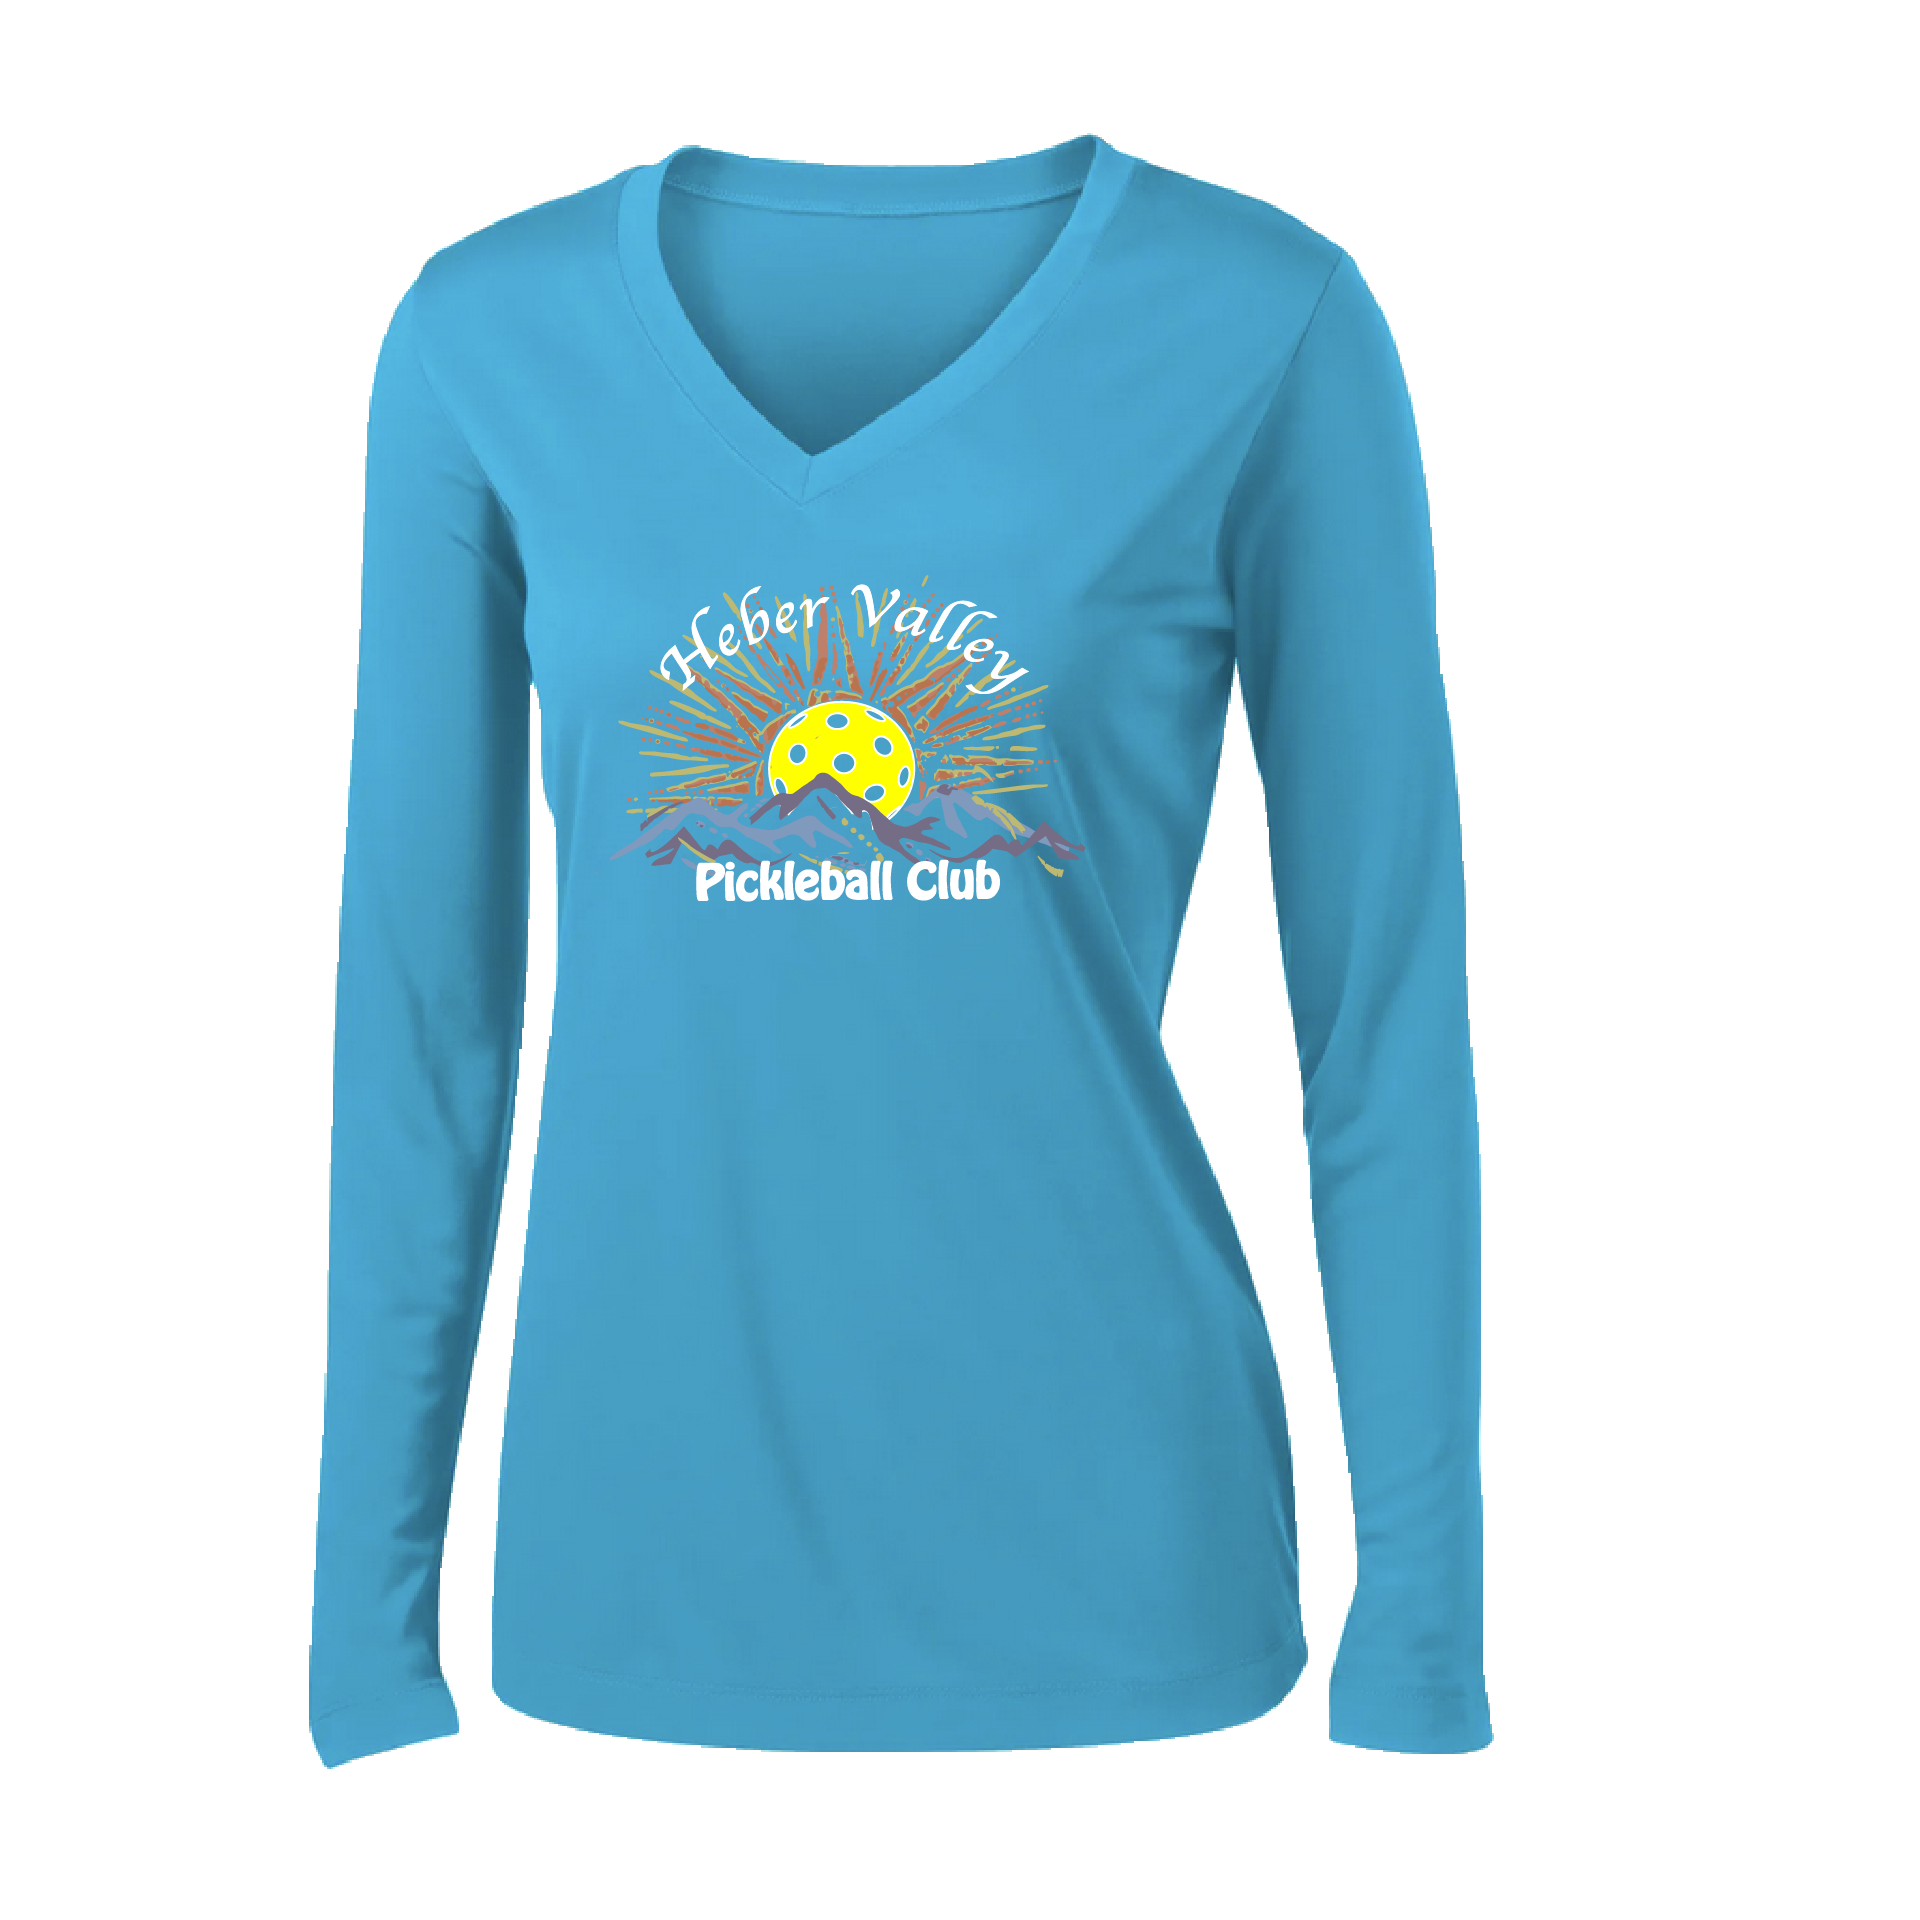 Pickleball Shirt Design: Heber Valley Pickleball Club   Women's Styles: Long Sleeve V-Neck  Turn up the volume in this Women's shirt with its perfect mix of softness and attitude. Material is ultra-comfortable with moisture wicking properties and tri-blend softness. PosiCharge technology locks in color. Highly breathable and lightweight.